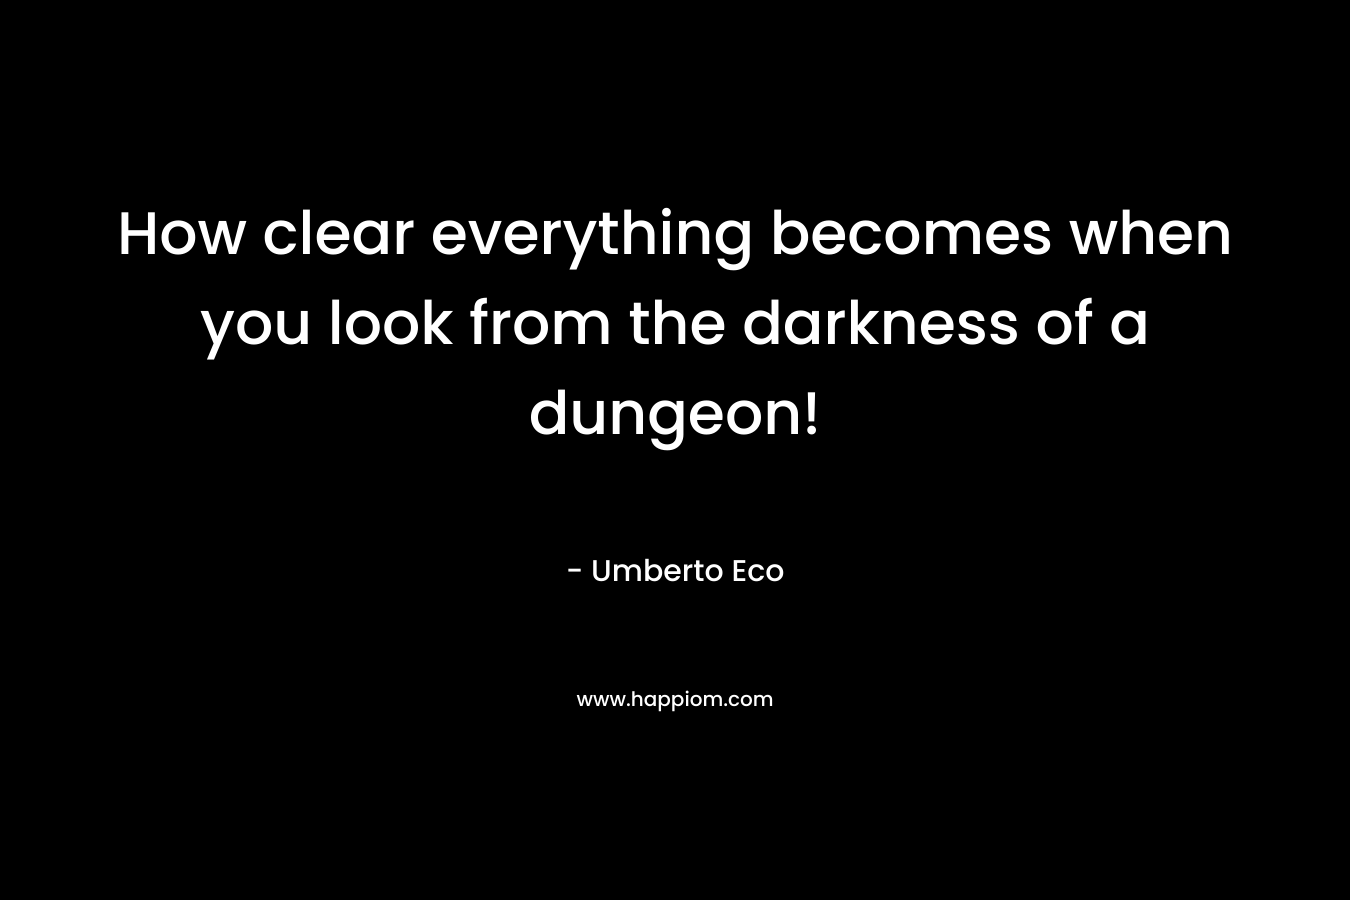 How clear everything becomes when you look from the darkness of a dungeon!